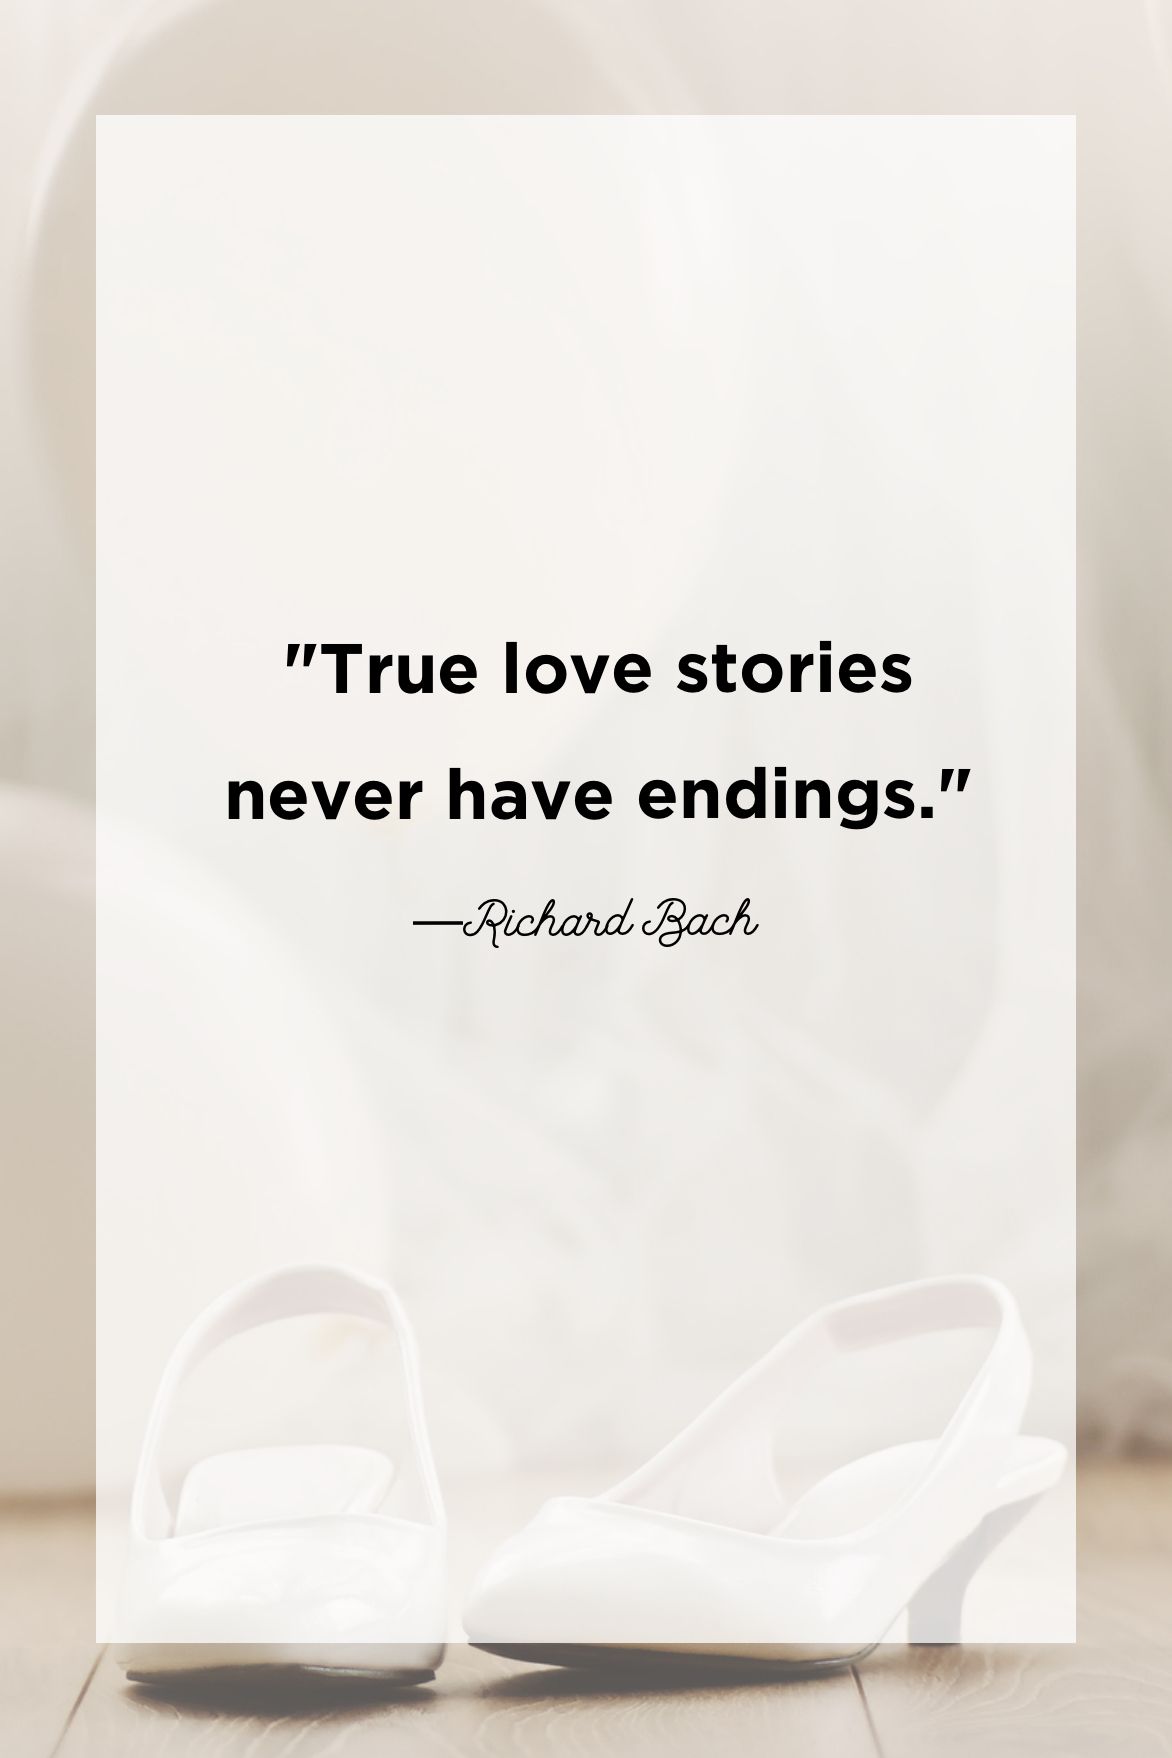 12 Wedding Quotes for Your Big Day   The Best Wedding Day Quotes